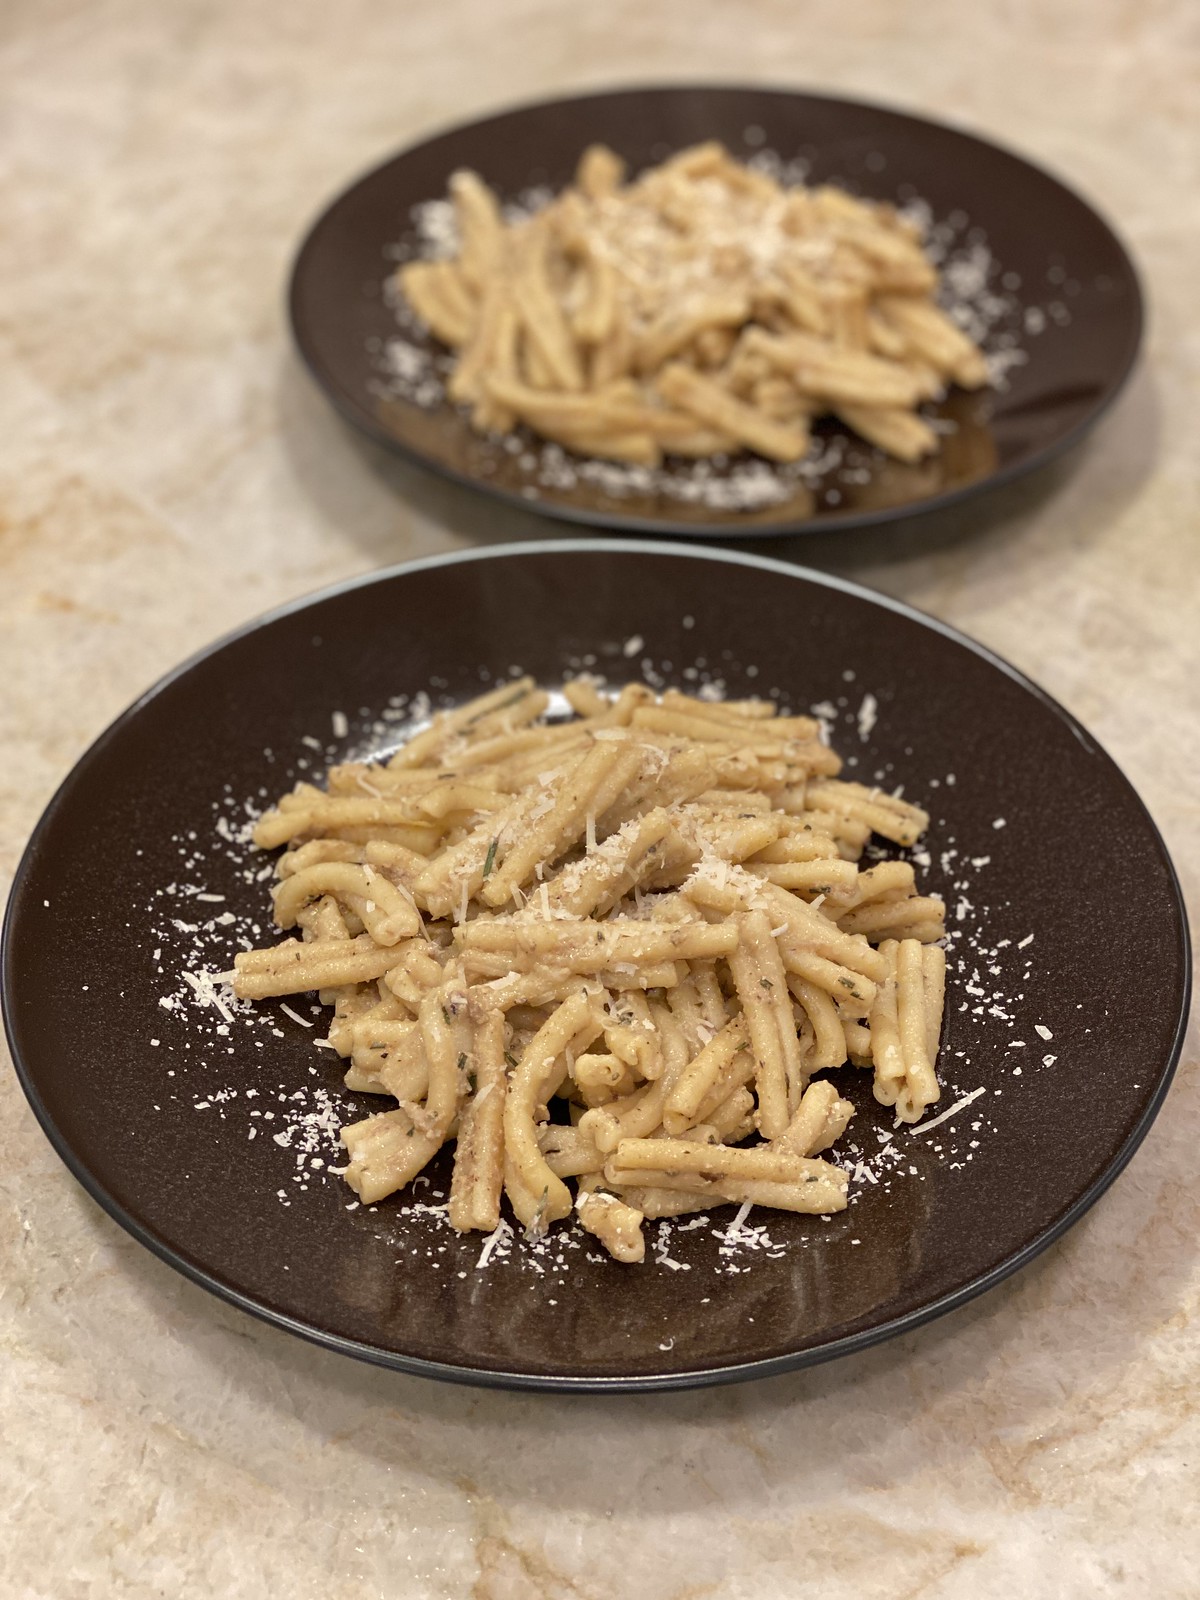 Pasta with black truffle butter and mushrooms